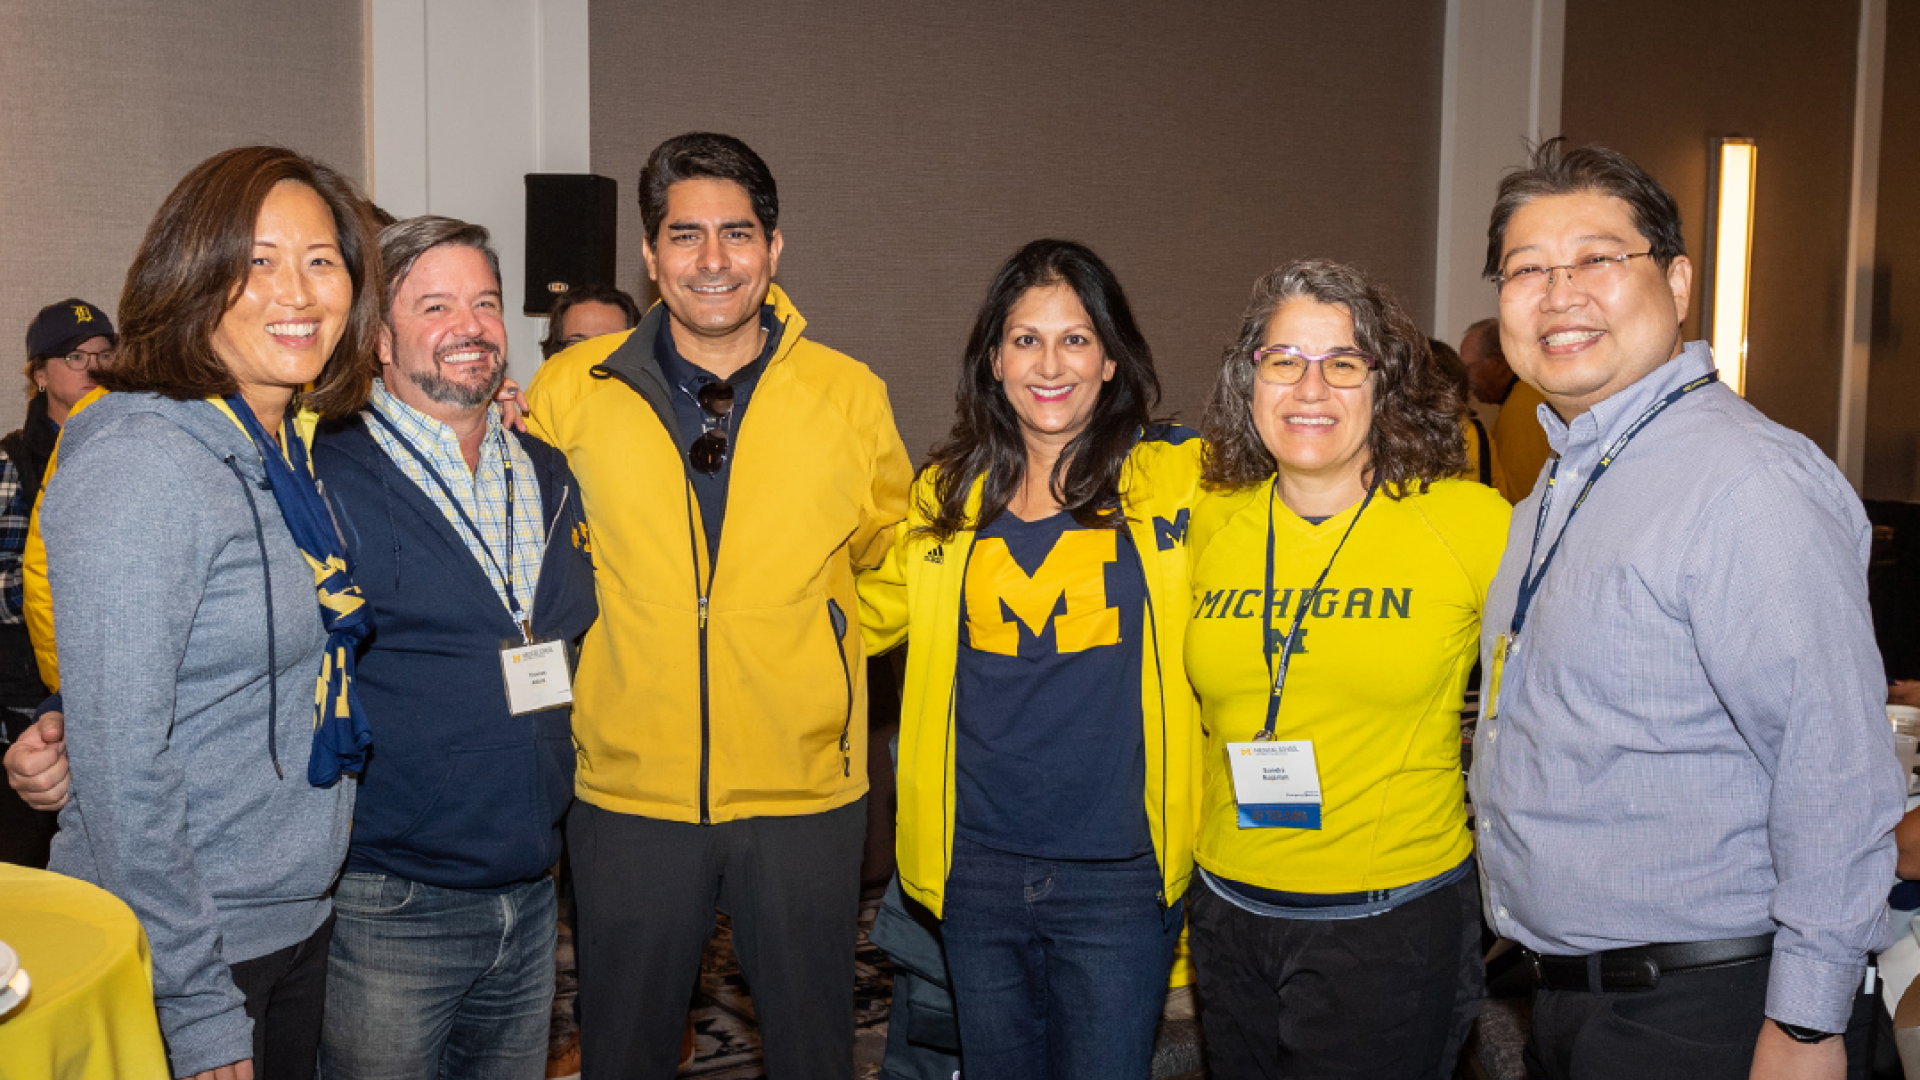 A group of 6 Medical School alumni wearing University of Michigan gear, pose together.